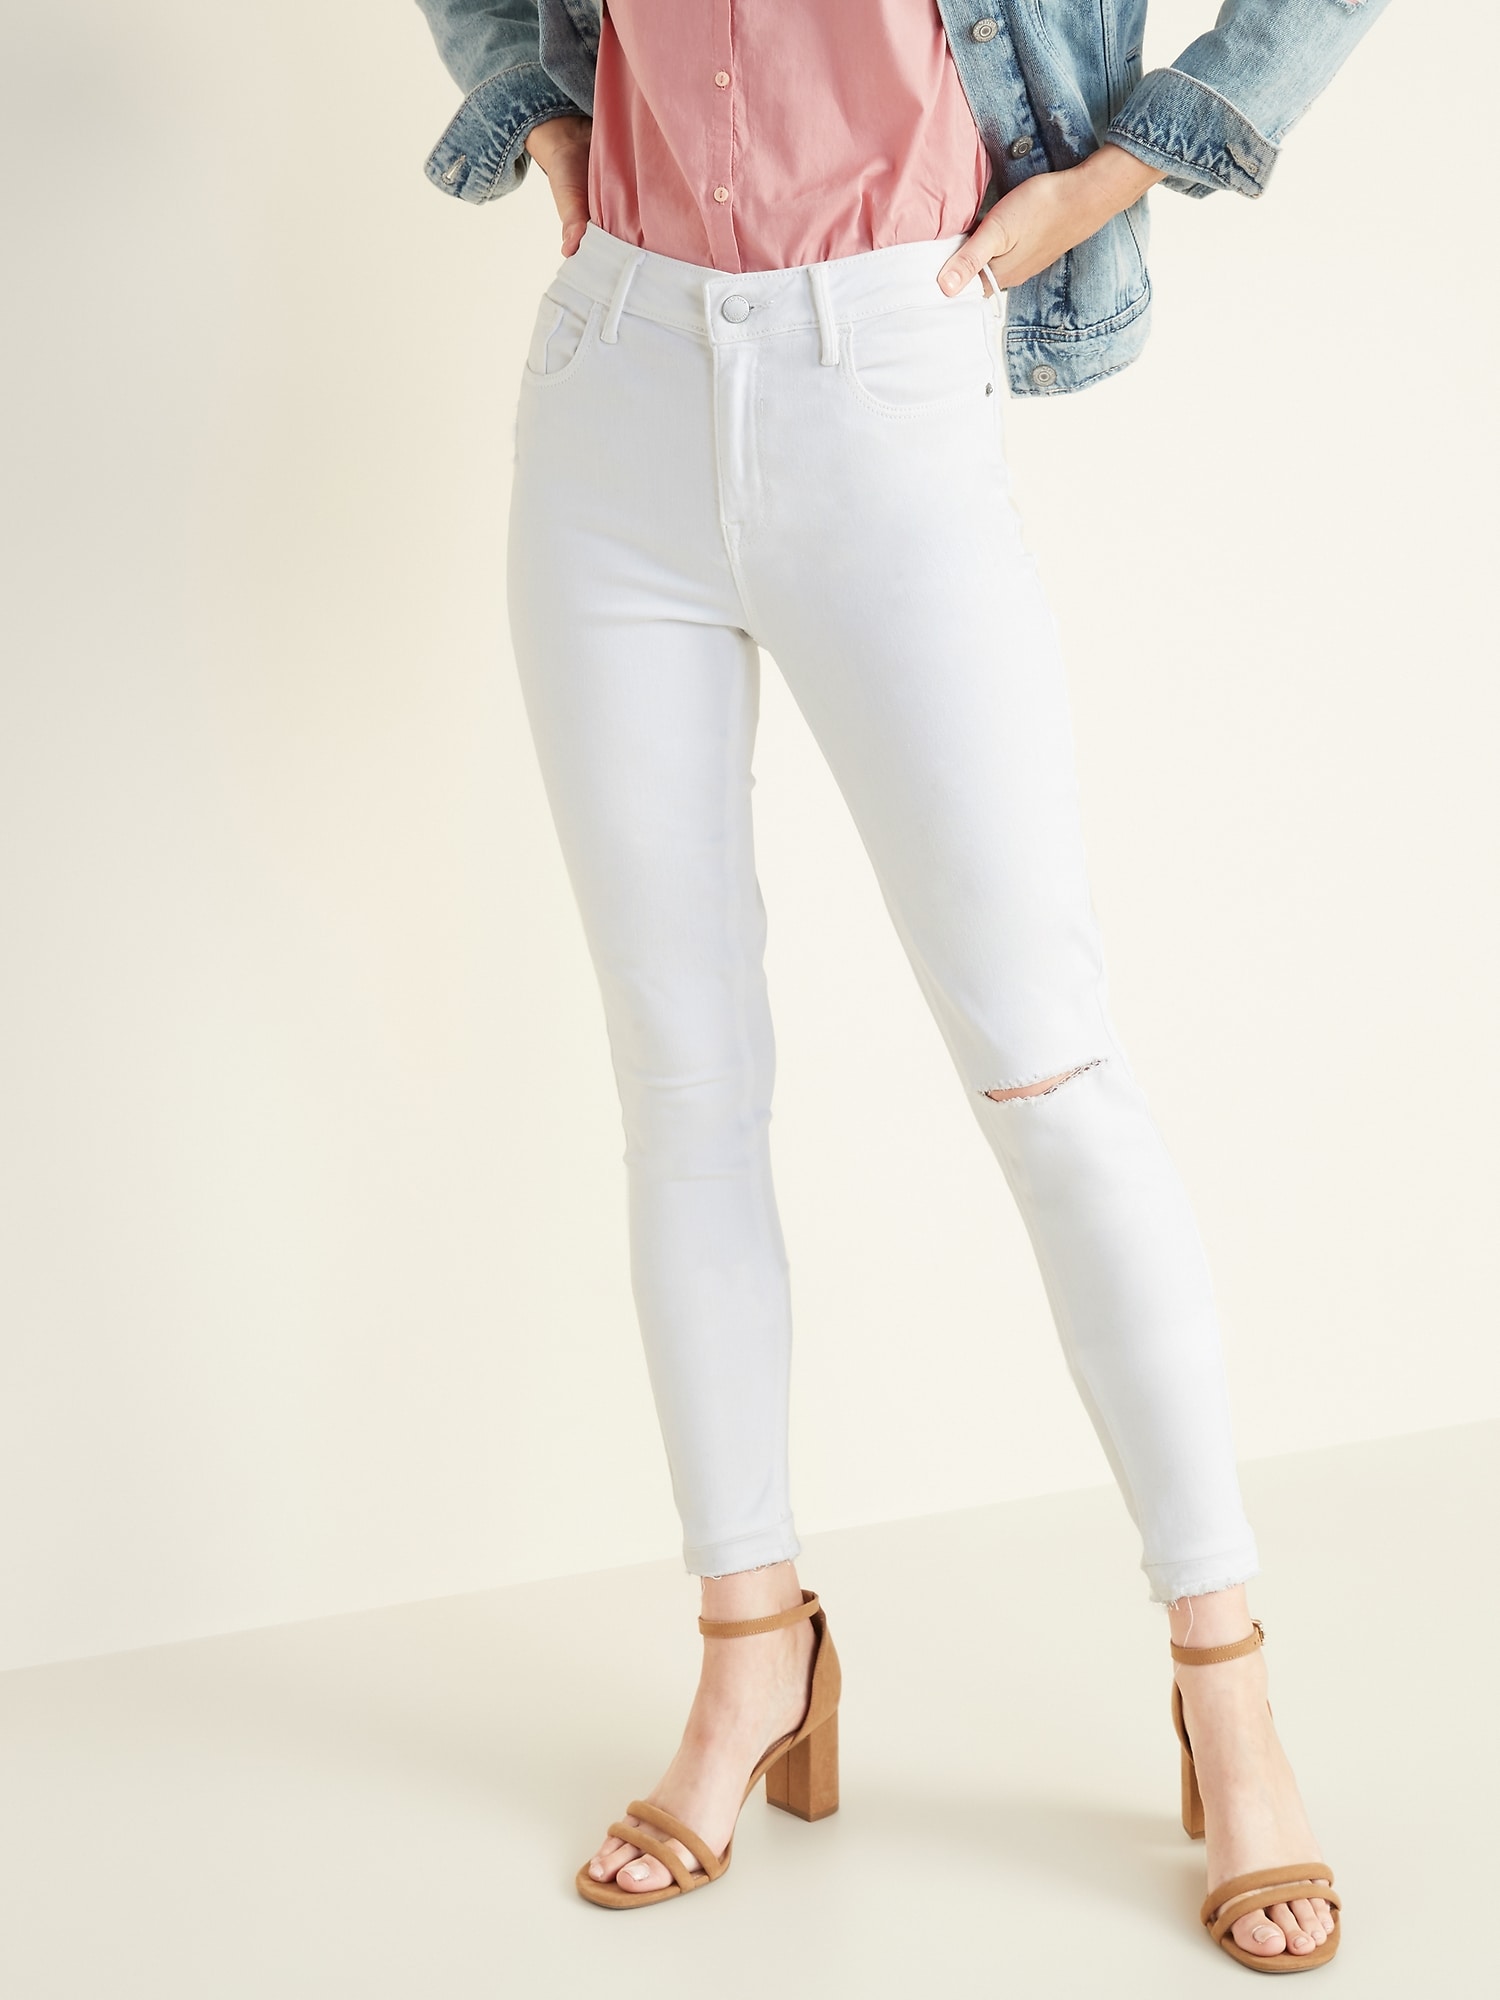 old navy white distressed jeans